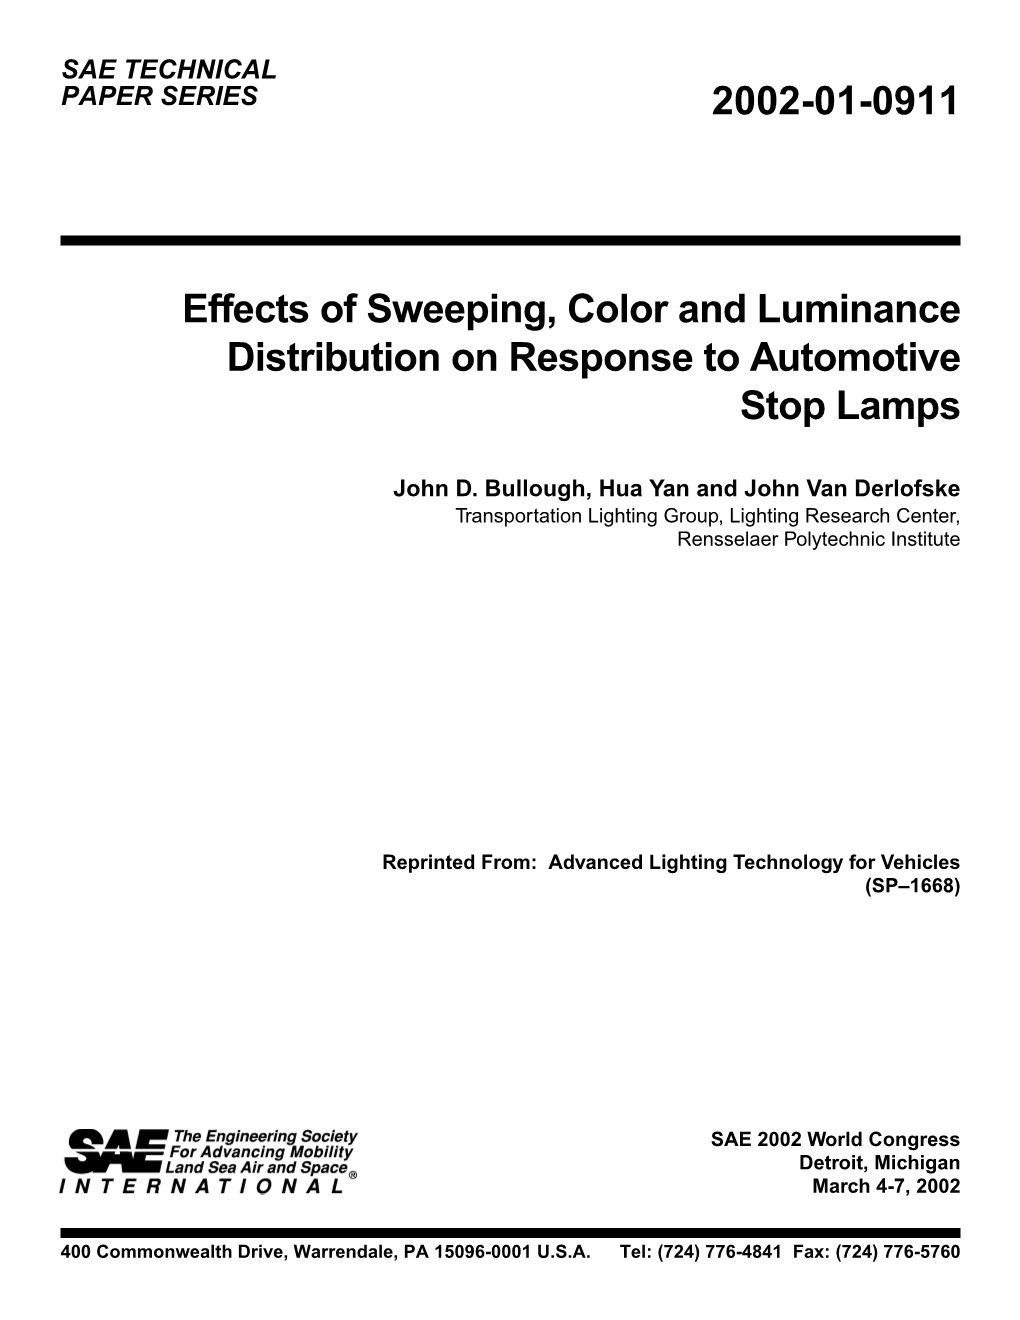 2002-01-0911 Effects of Sweeping, Color and Luminance Distribution on Response to Automotive Stop Lamps